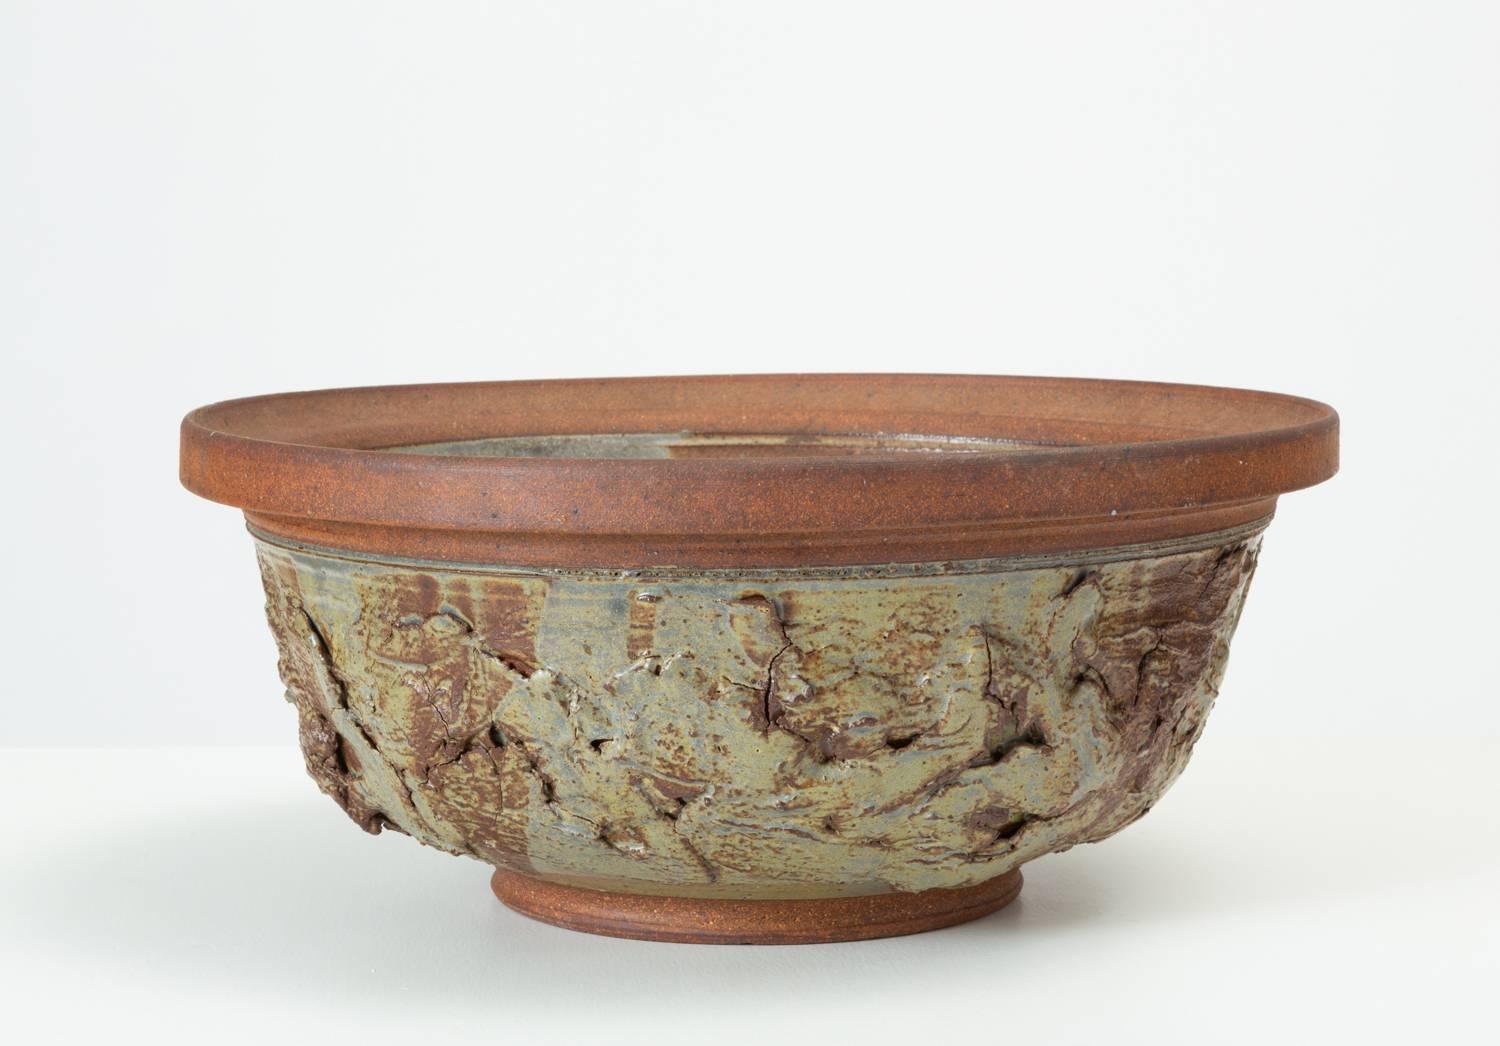 A 1970s large stoneware bowl by Alberta, Canada-based potter Ed Drahanchuk. His studio works were made from local clays and often featured hand-built appliqués, giving a rough-hewn and organic impression. This partially glazed pieces has an